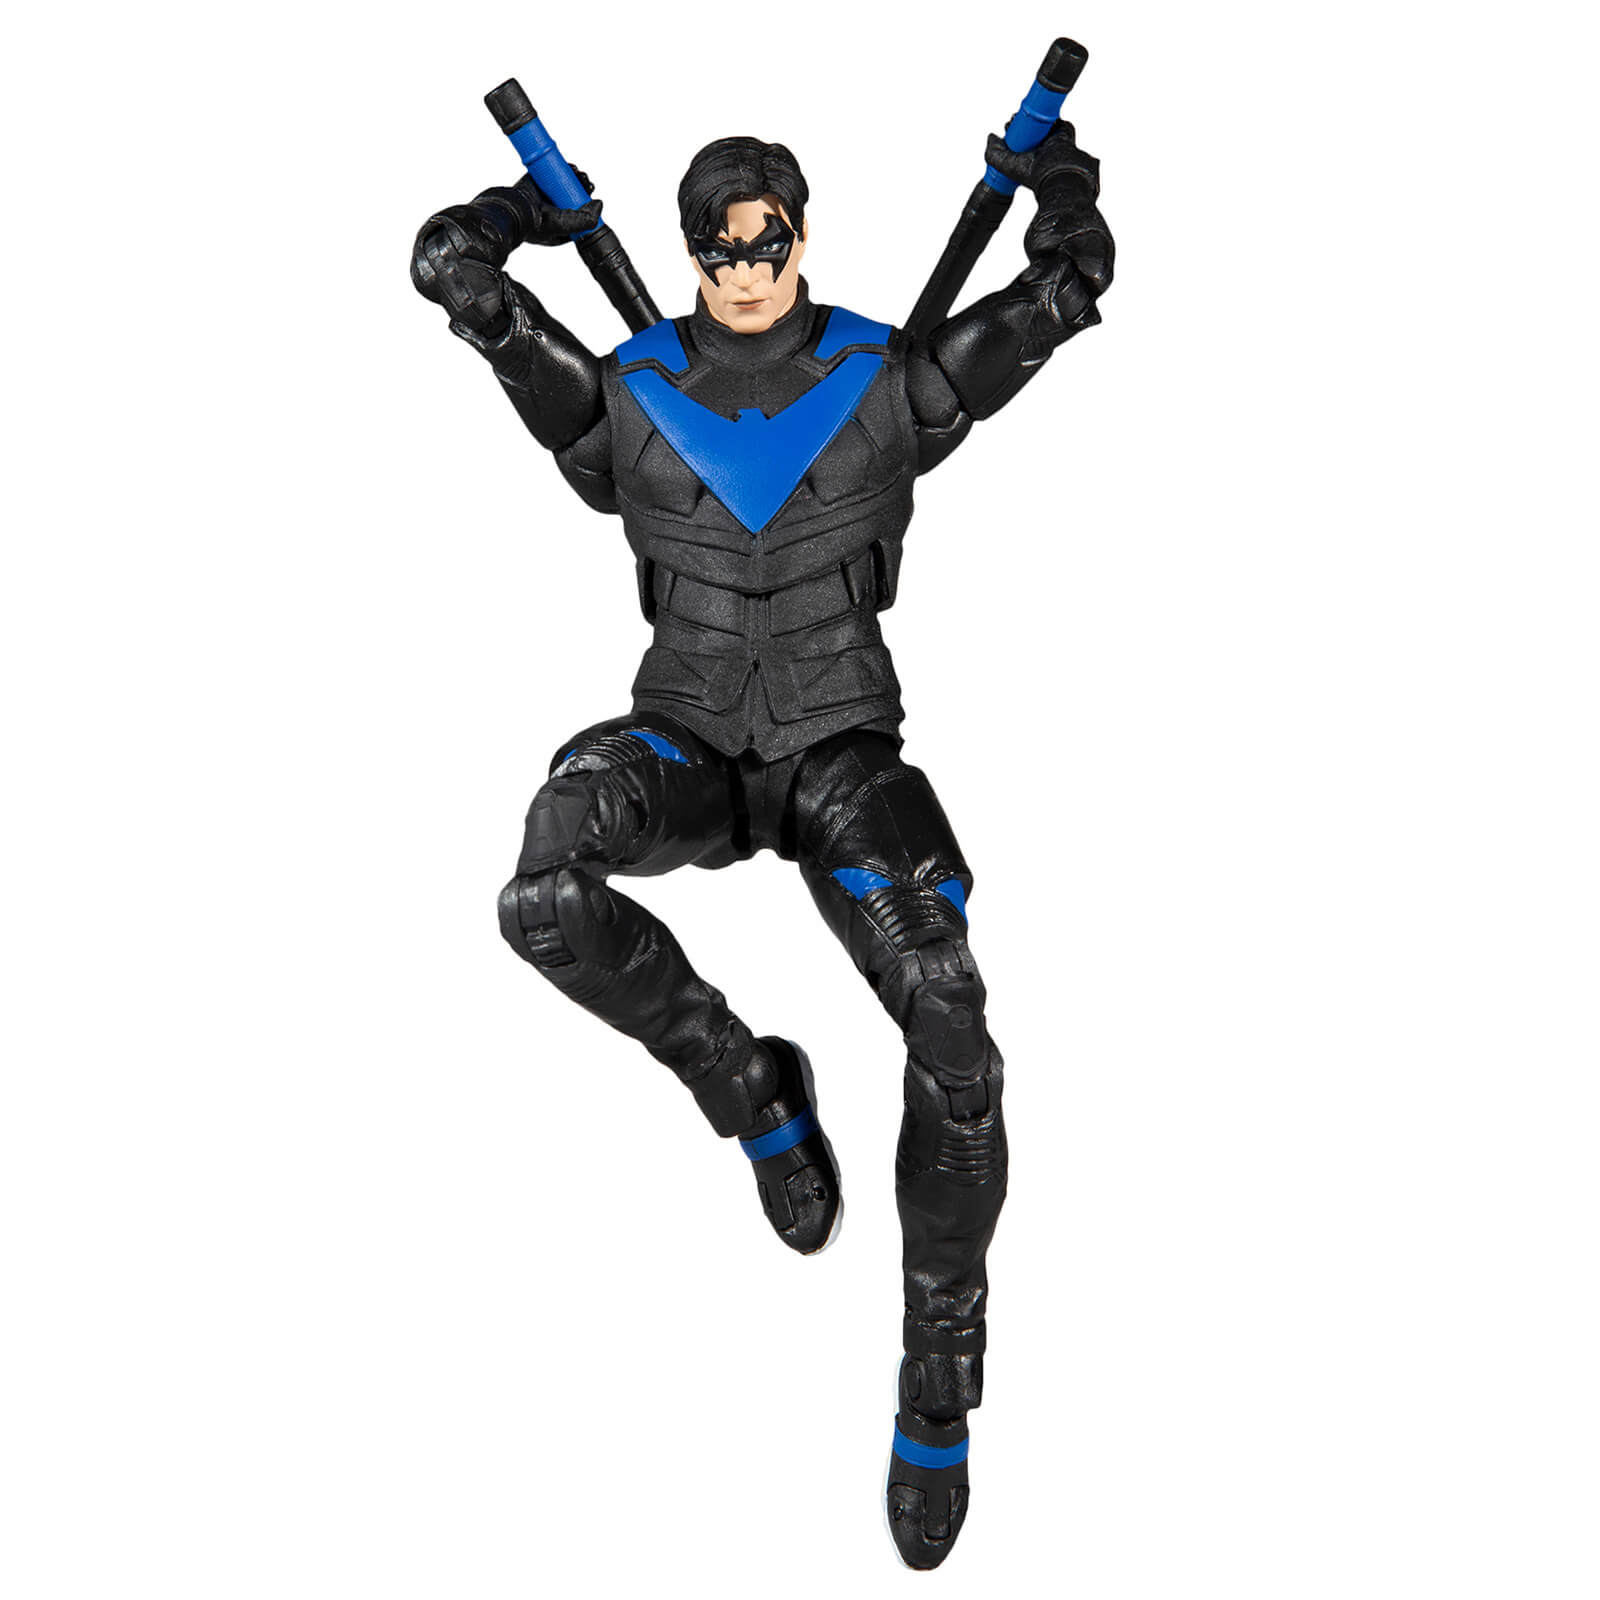 Photos - Action Figures / Transformers DC McFarlane  Gaming 7 Inch Action Figure - Nightwing  MF15 (Gotham Knights)